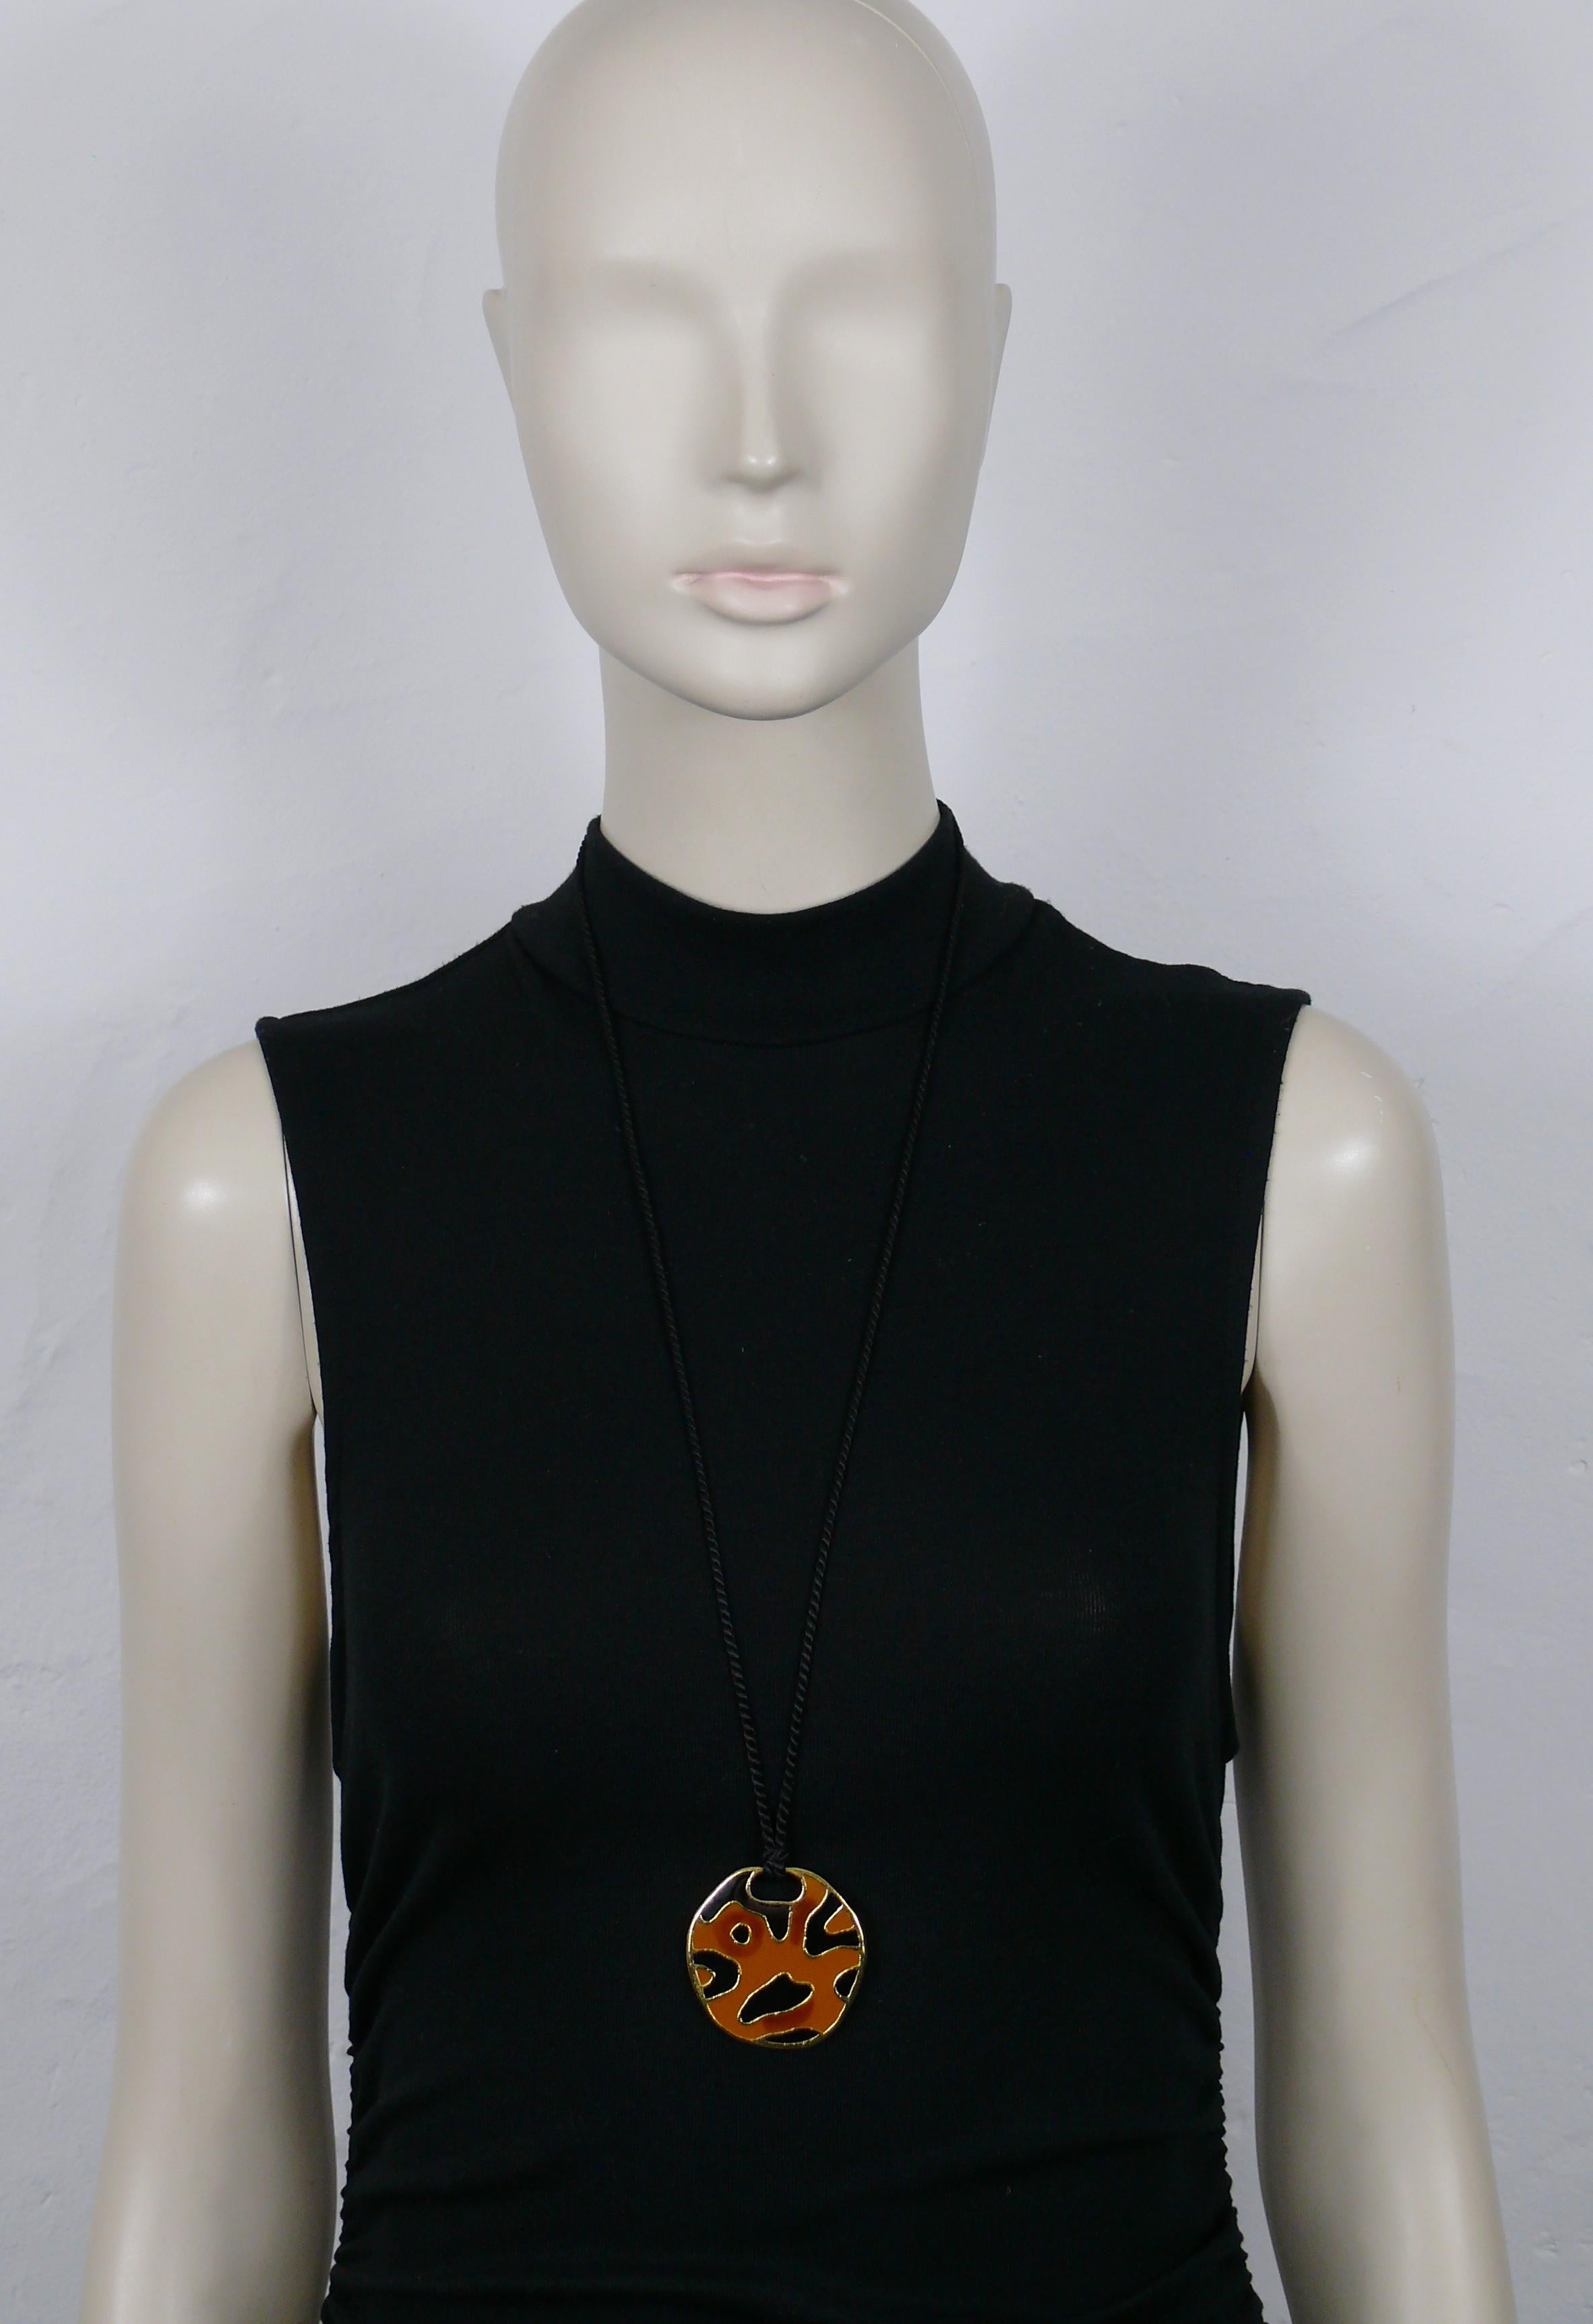 CHRISTIAN DIOR vintage enamel medallion pendant necklace.

Black shoelace.
Slips on (no closure system).

Embossed CHRISTIAN DIOR Boutique.

Indicative measurements : wearable length approx. 39 cm (15.35 inches) / pendant diameter approx. 4.5 cm